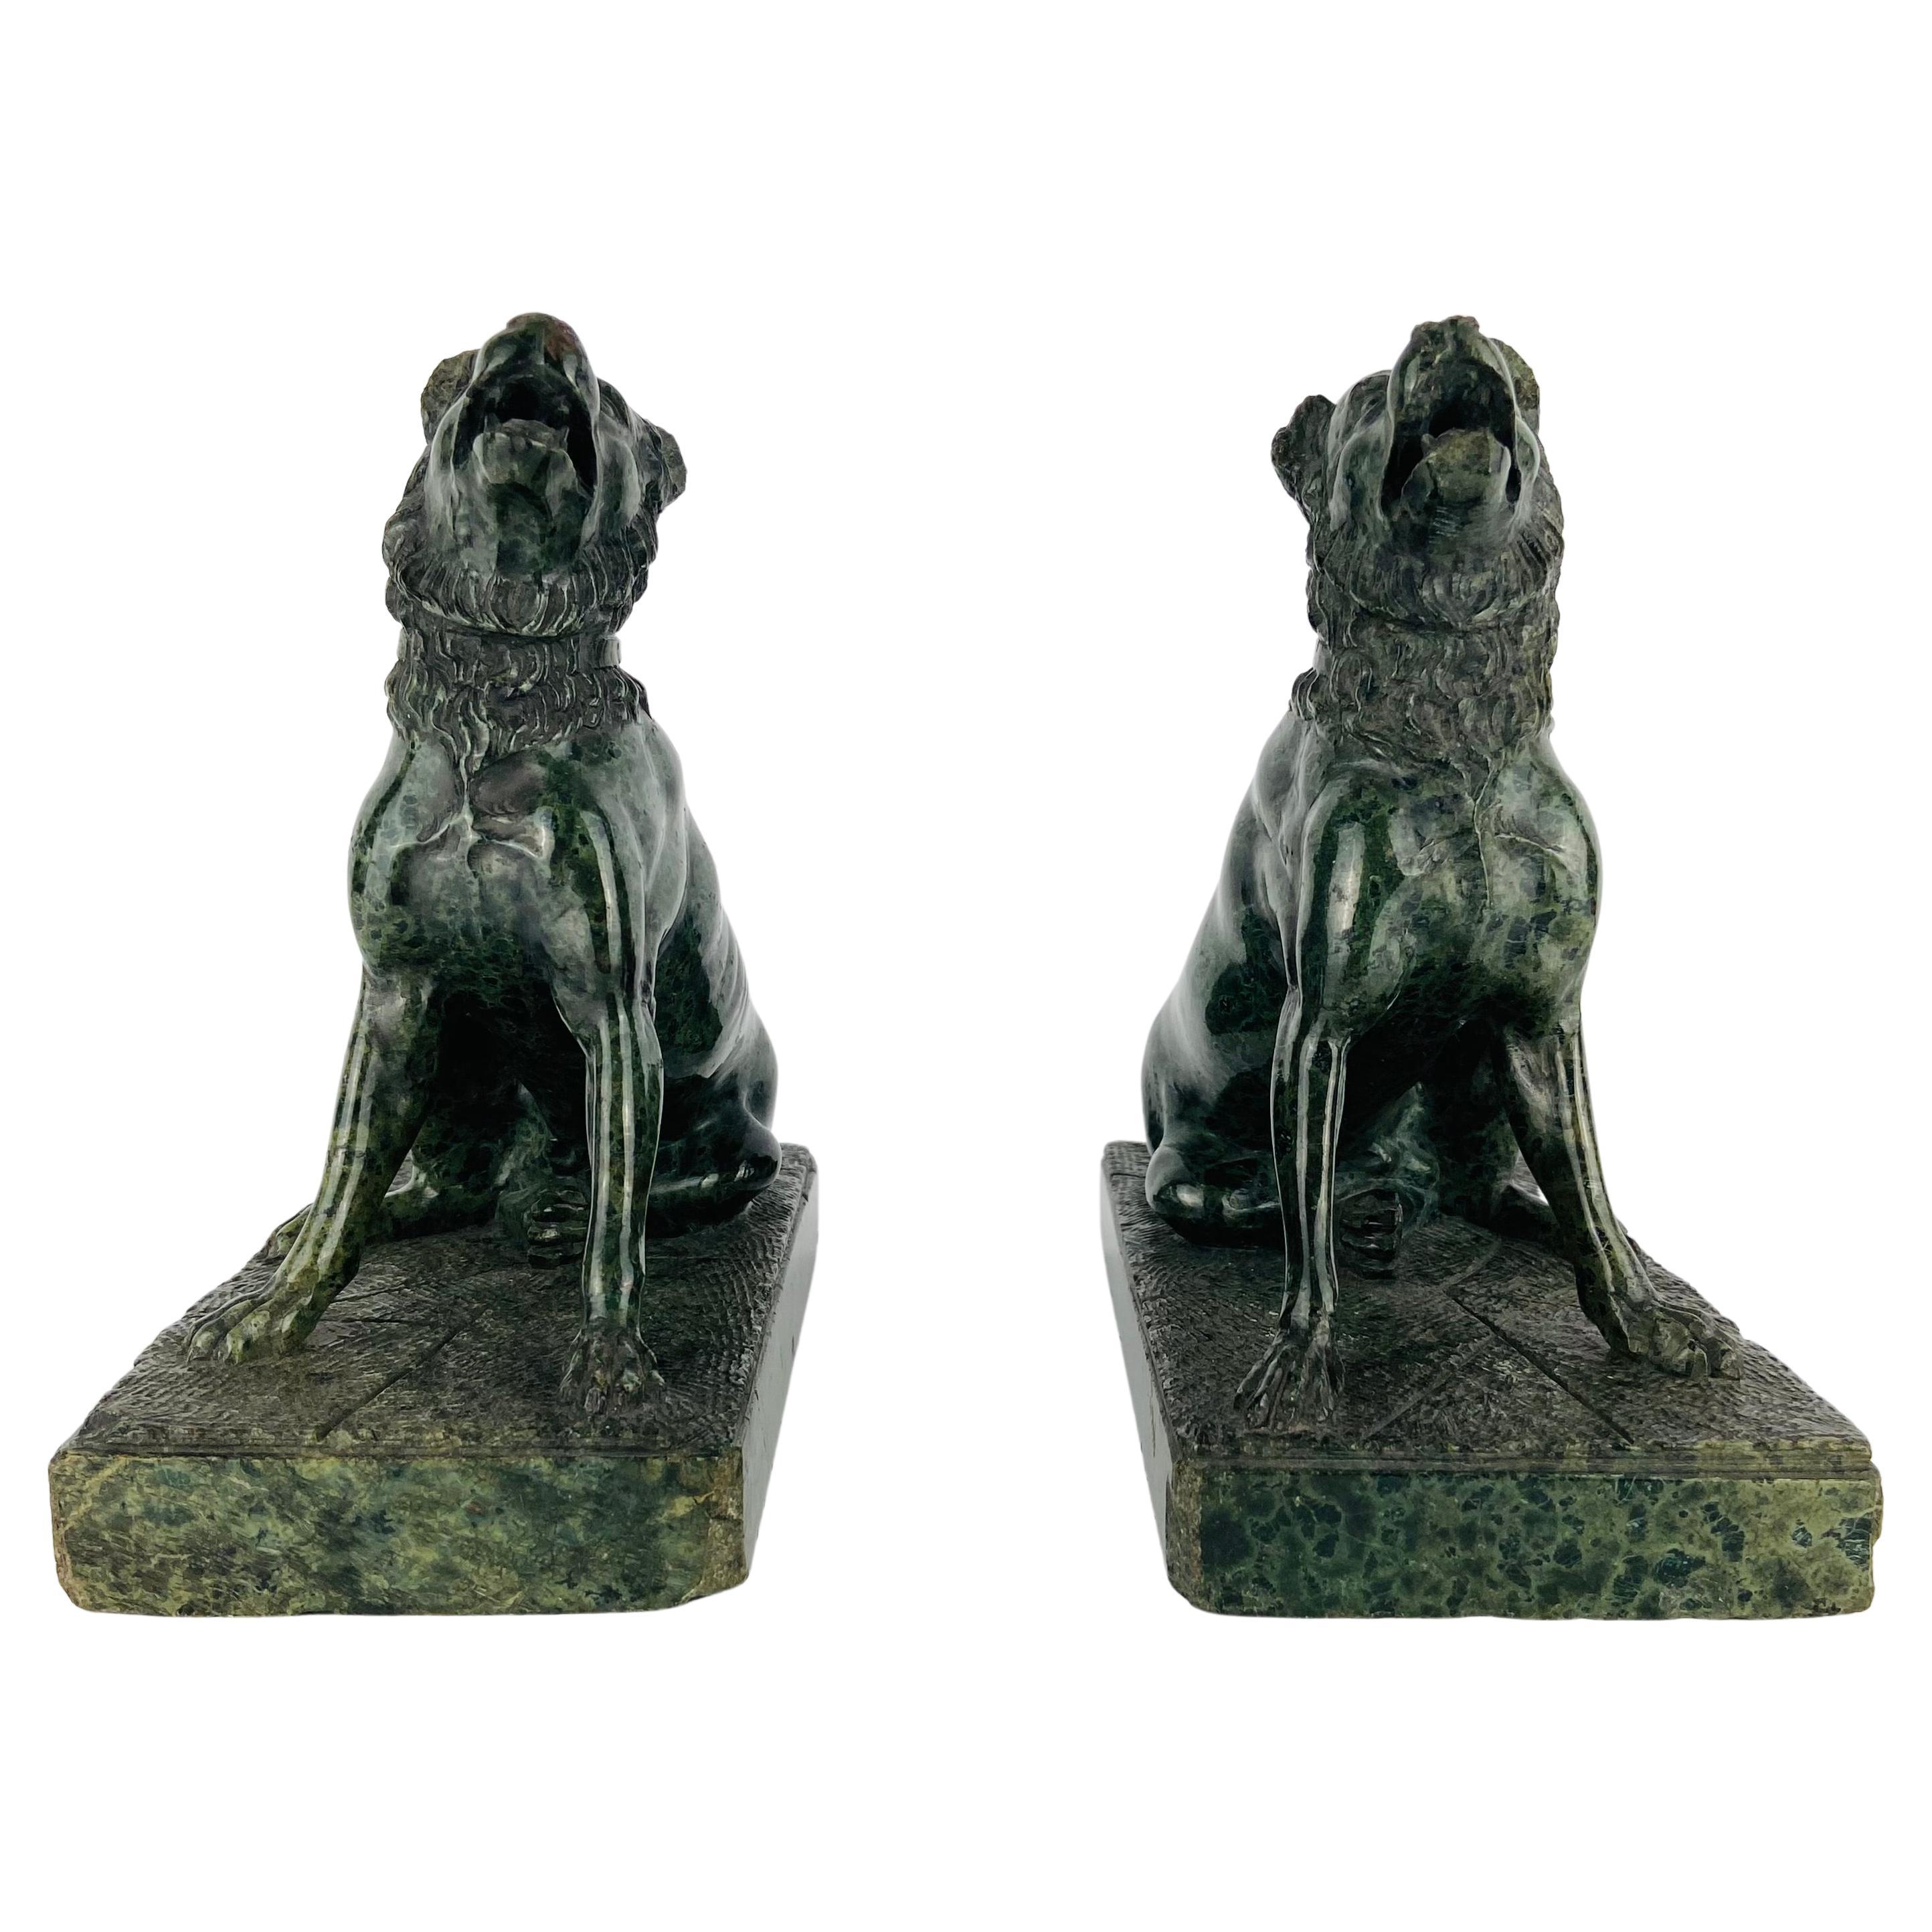 Alcibiades Dogs in serpentine, Italy, Grand Tour, ca. 1880

Discovered in around 1750 at Monte Cagnuolo in Italy, the original dog was thought to represent the famous mastiff hound owned by the Greek General Alcibiades and was carved in white